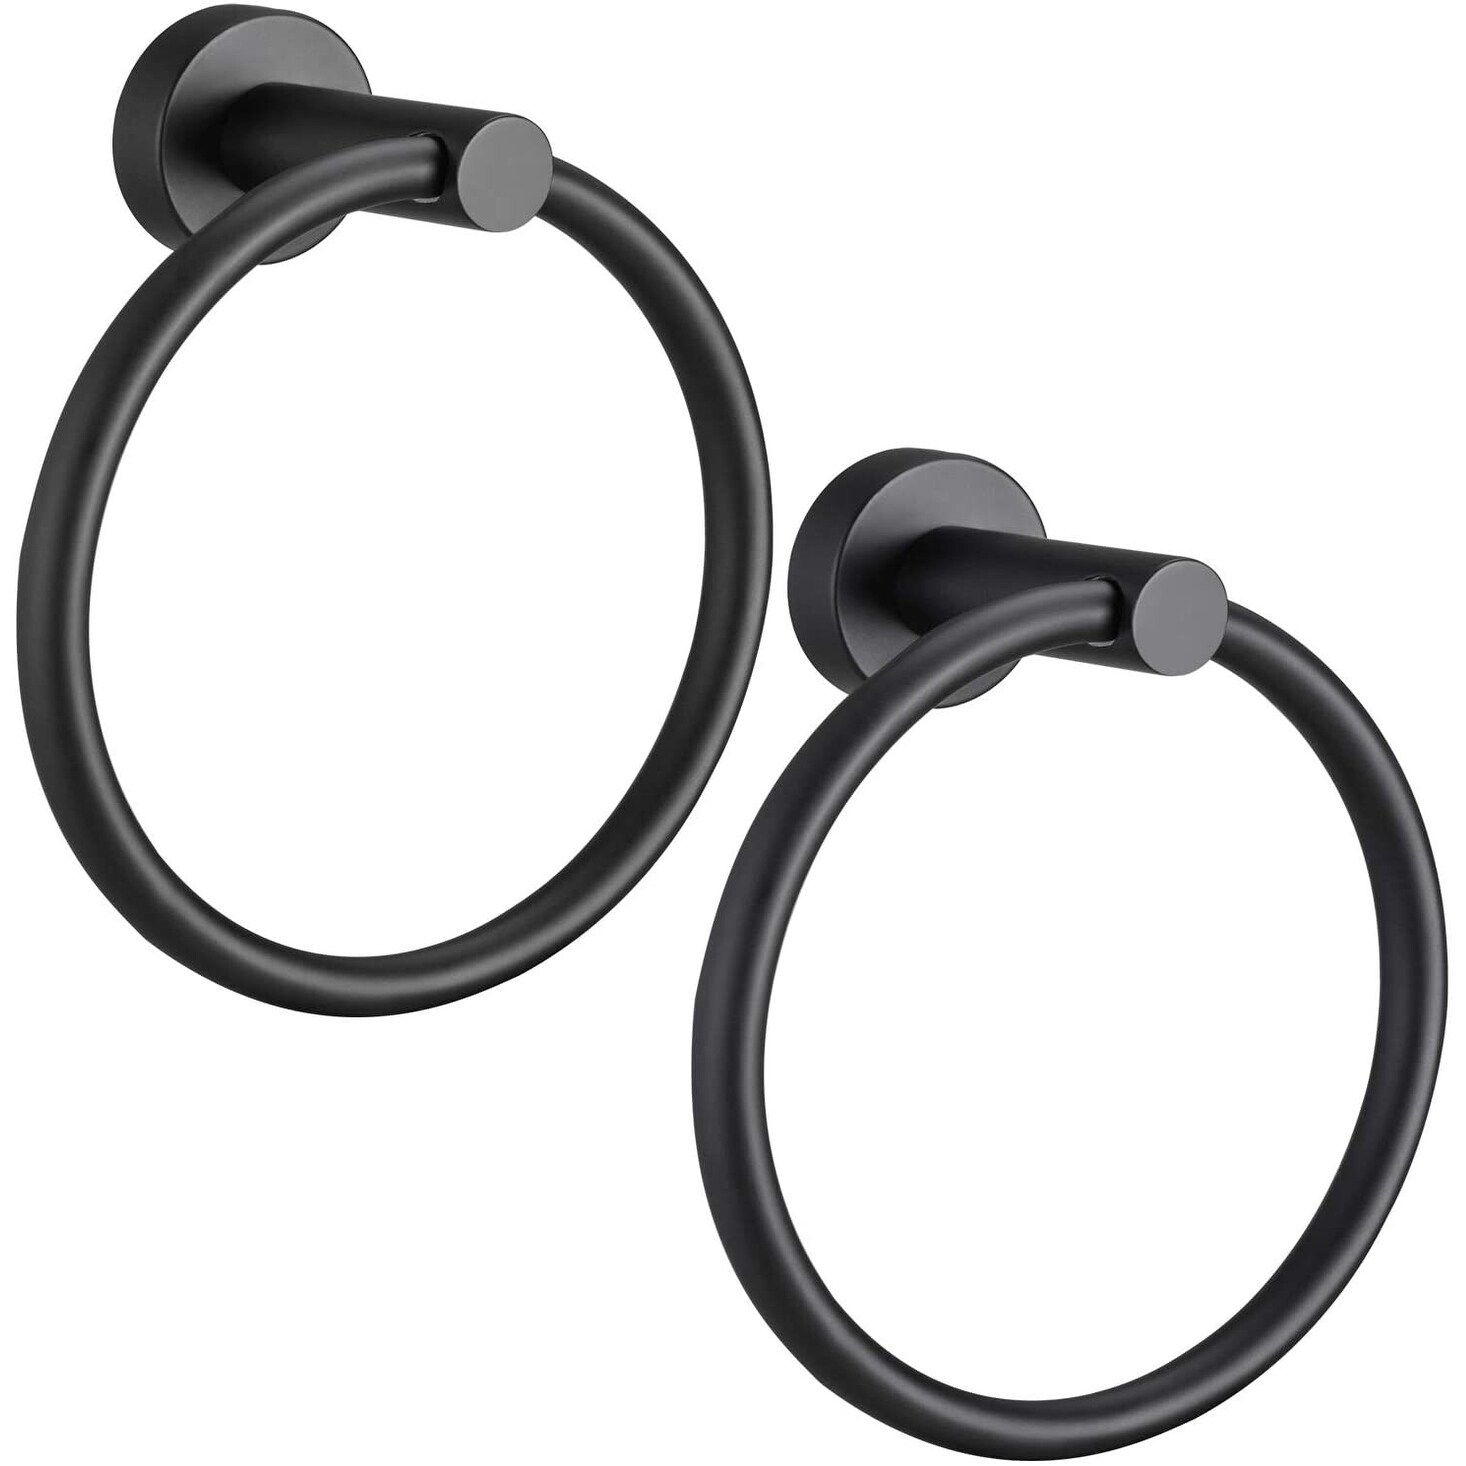 https://ak1.ostkcdn.com/images/products/is/images/direct/d767548c8b91f63b691d221c1c6ceaa8ca3e1802/AITINKAN-Bathroom-Hardware-Towel-Ring-2-pack.jpg